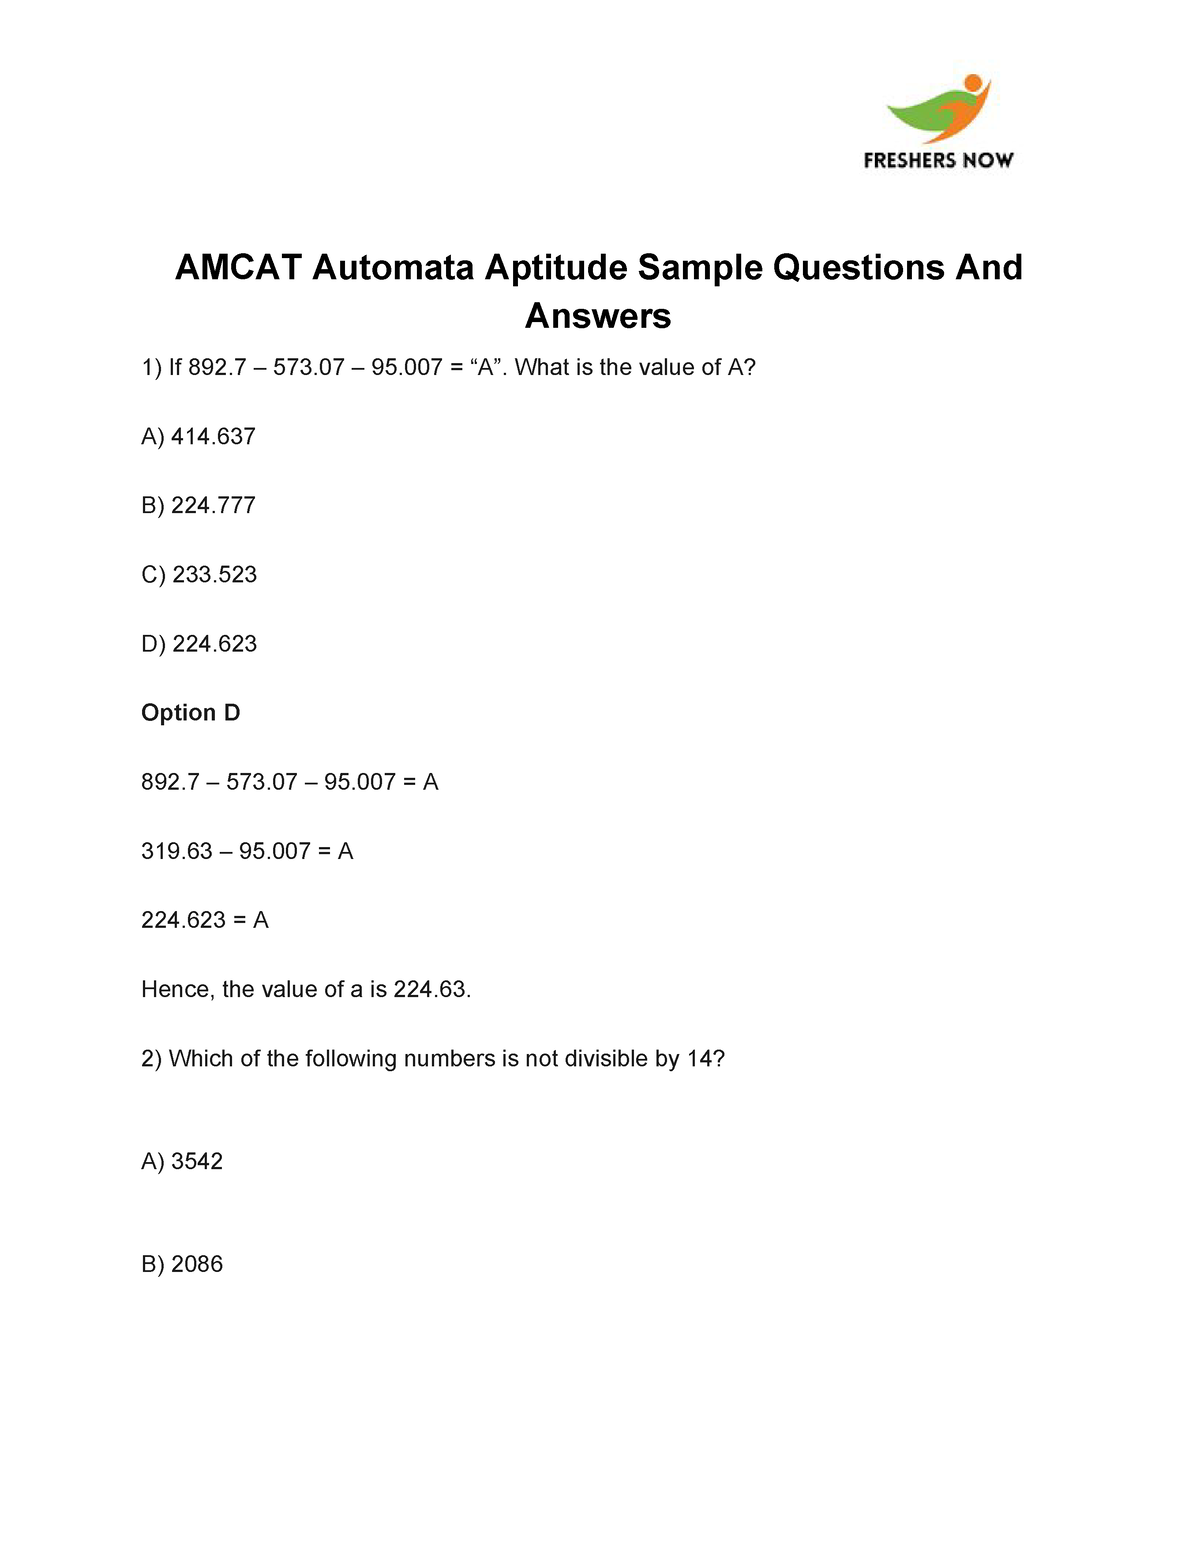 amcat-automata-aptitude-sample-questions-and-answers-answers-if-892-573-95